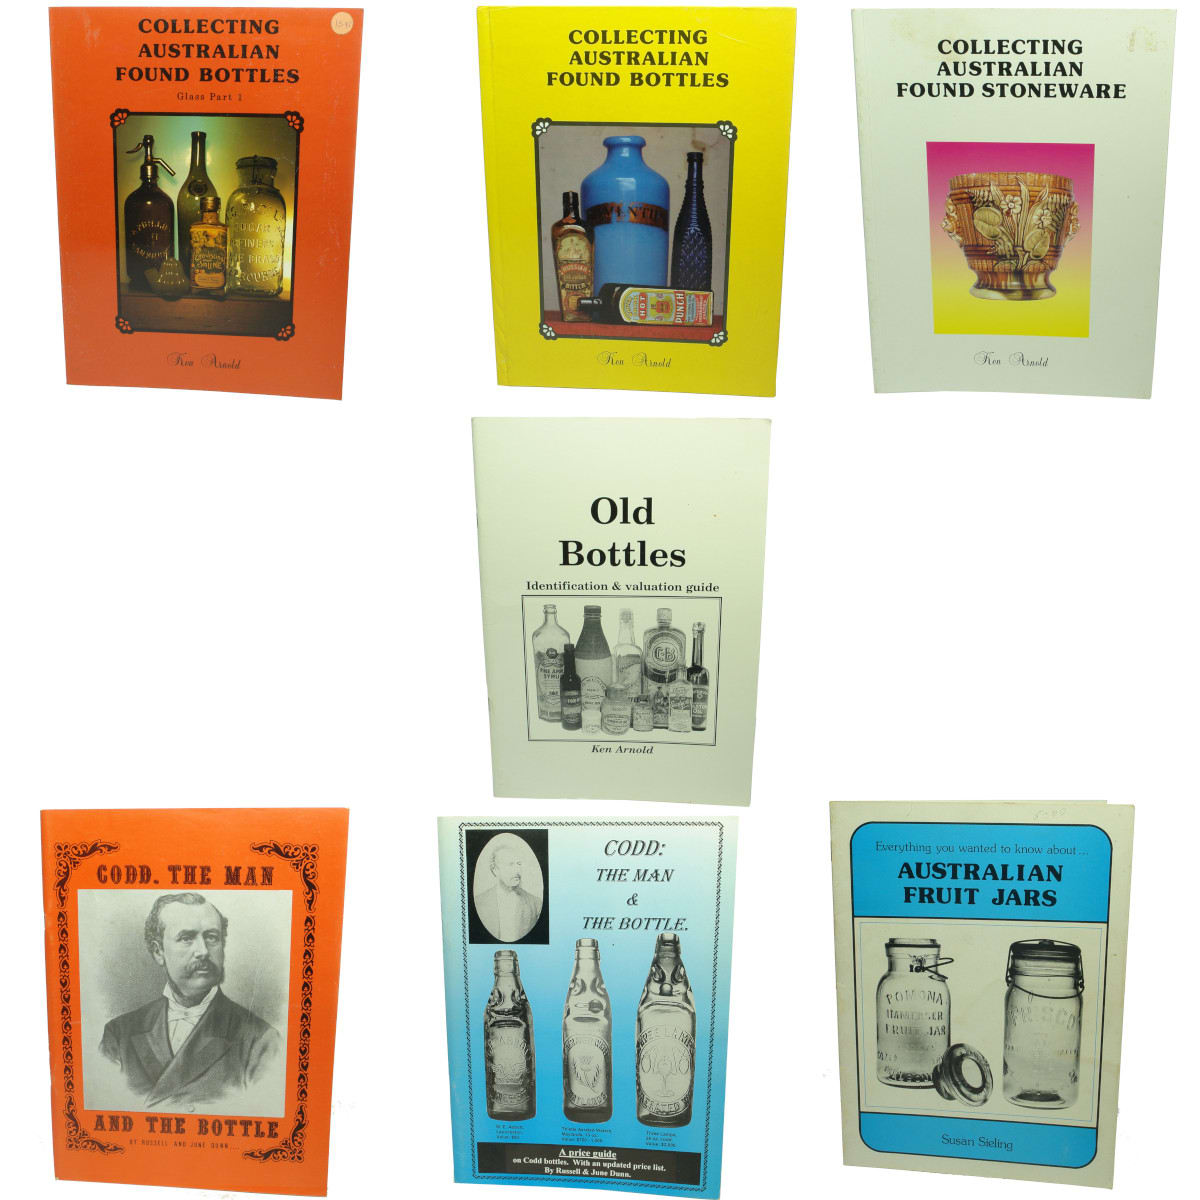 7 Collecting Books: 4 x Ken Arnold Bottle books; 2 different editions of Codd: The Man & The Bottle; Australian Fruit Jars.